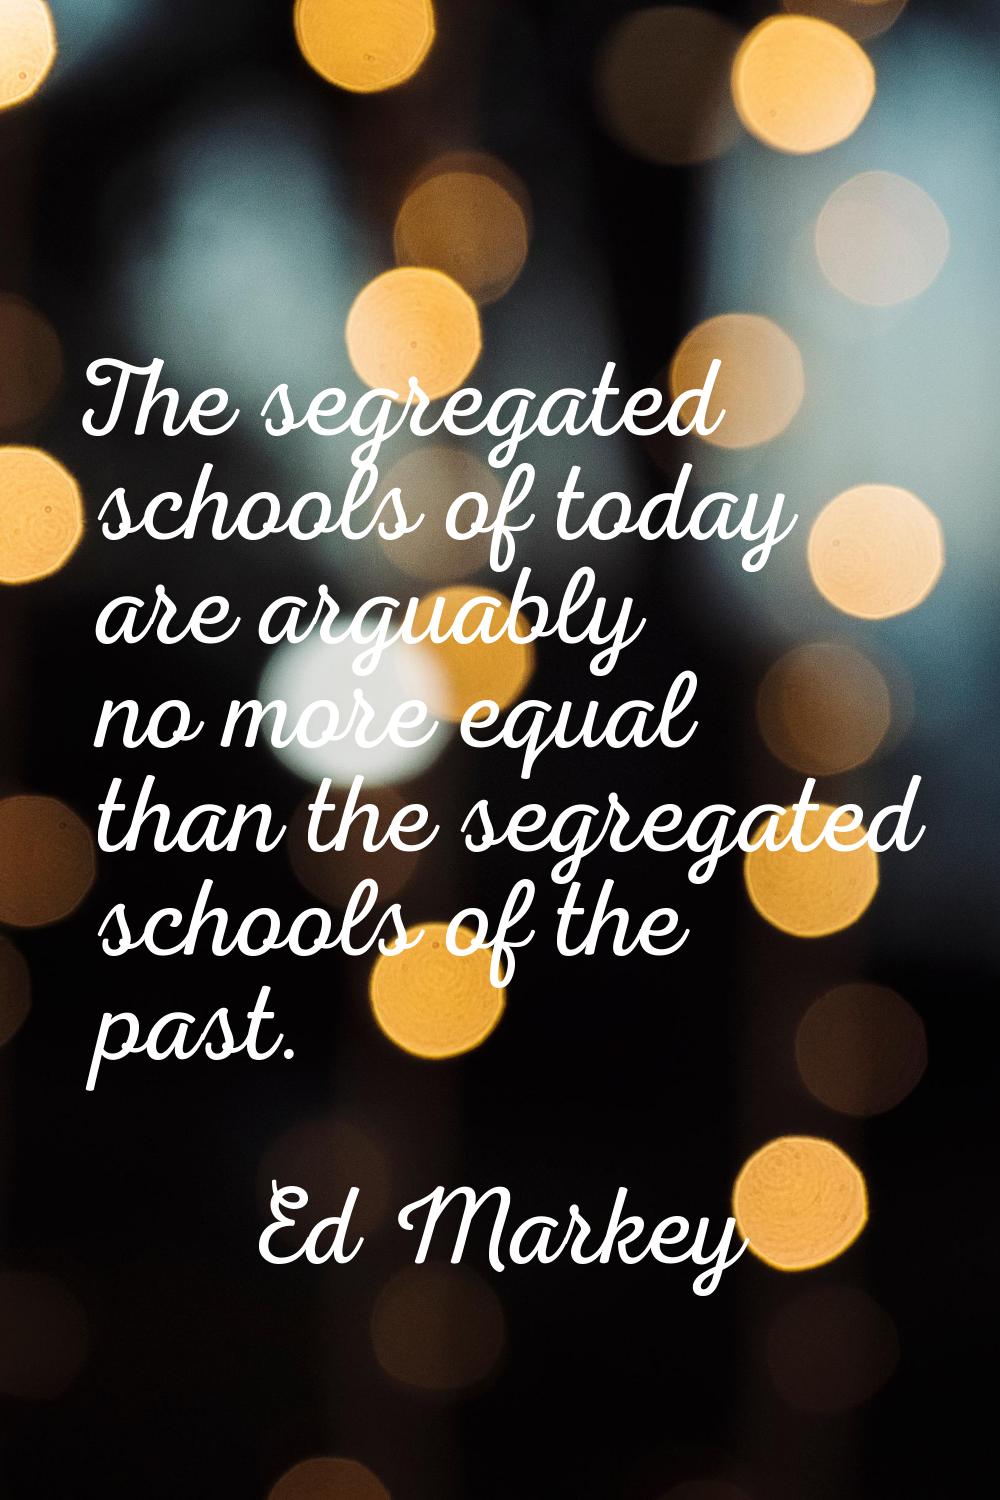 The segregated schools of today are arguably no more equal than the segregated schools of the past.